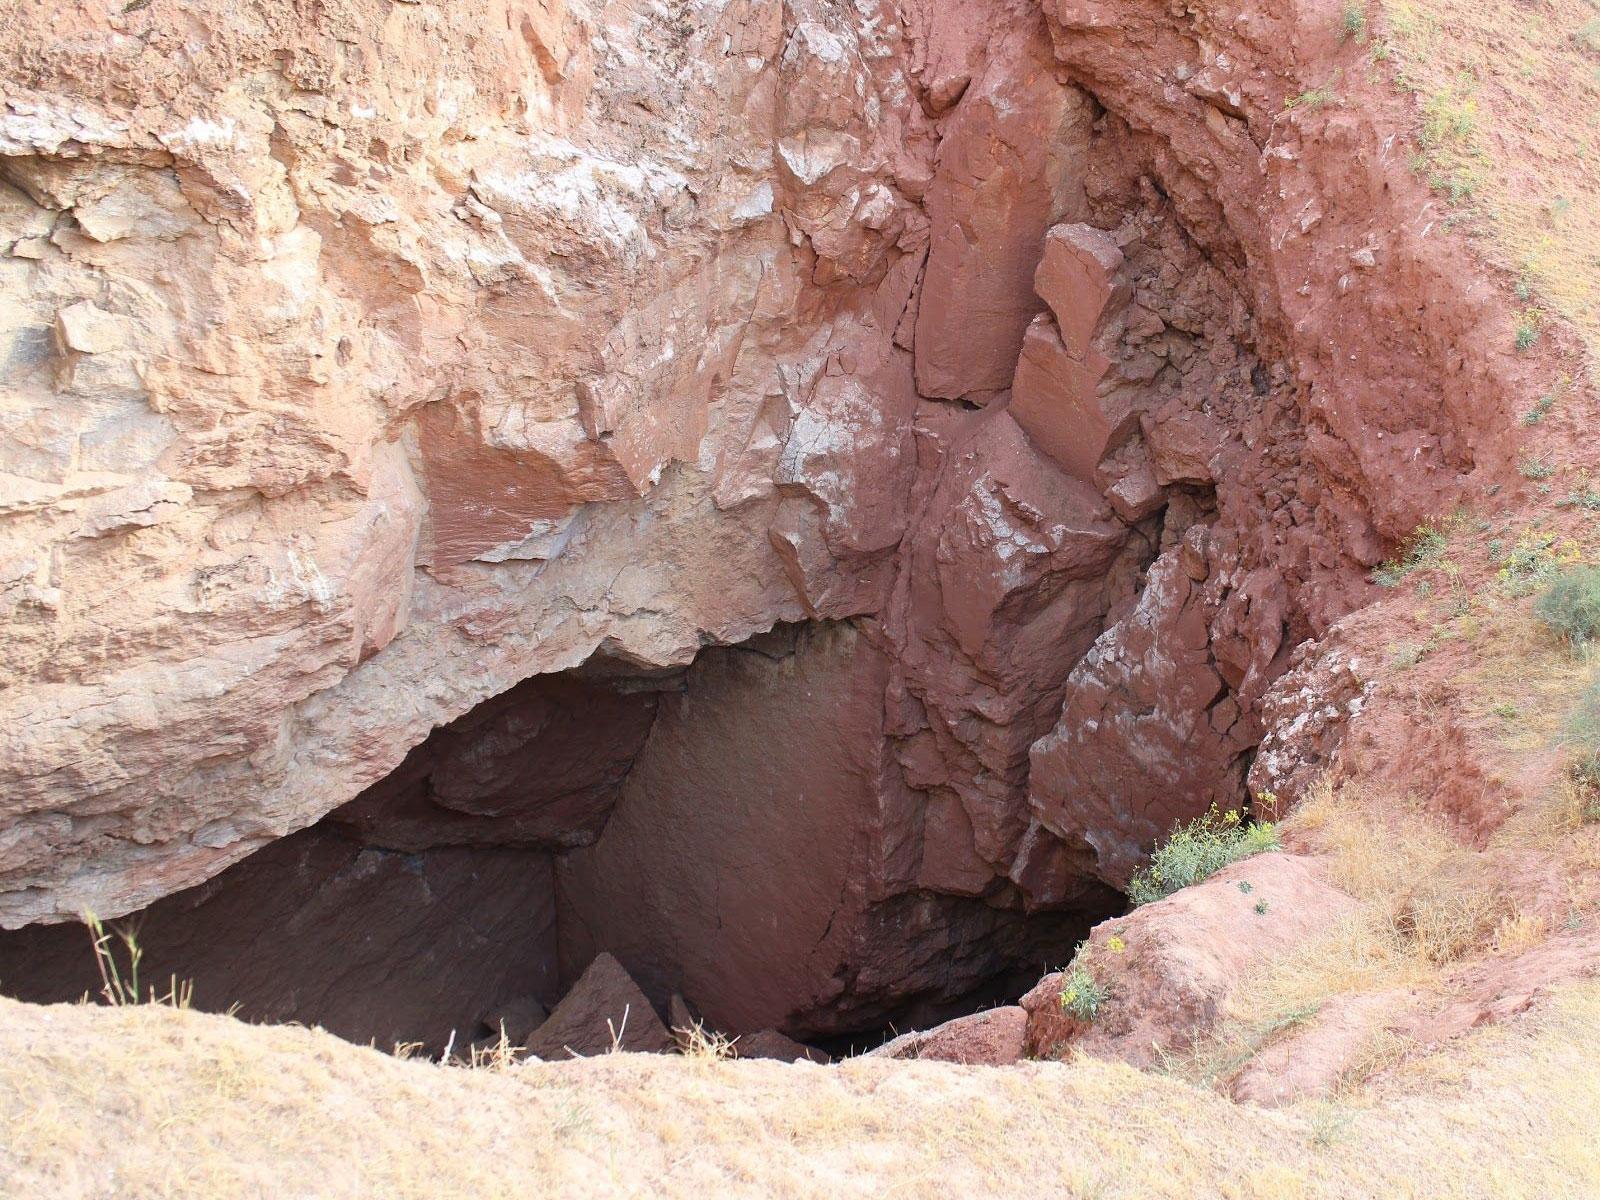 Entrance of the Kaptarhana cave in Lebap Province, eastern Turkmenistan, where the new species was found